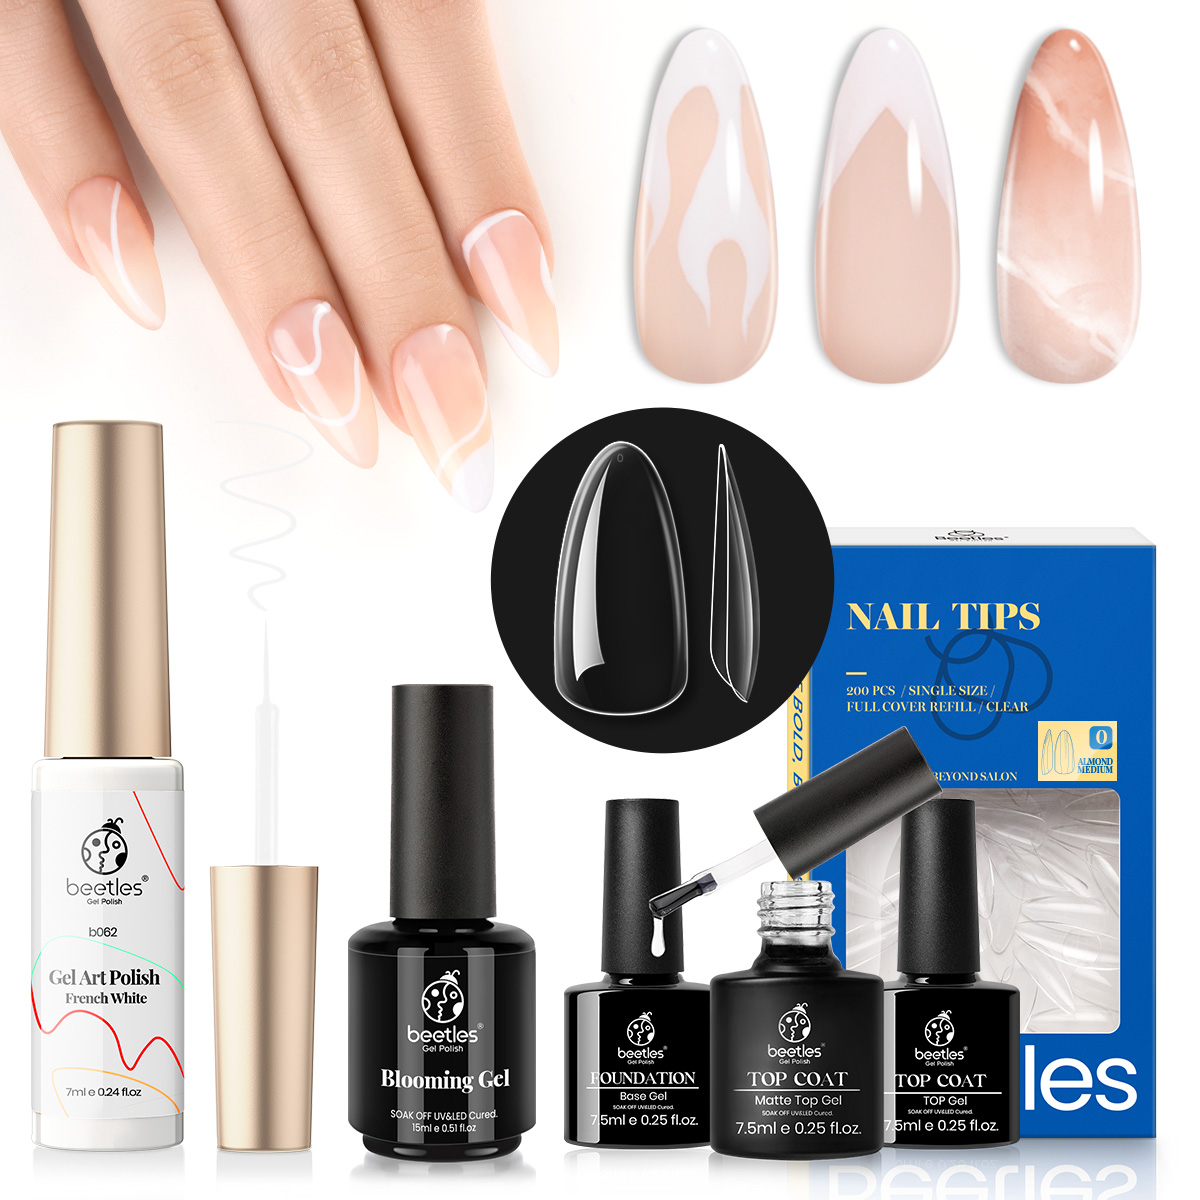 Beetles Gel Nail Tips Kit Beetles gel x Salon Quality & Affordable Softer & Resilient Premium PMMA MaterialsThinner Cuticle Contact Area Thicker Toward The Tip